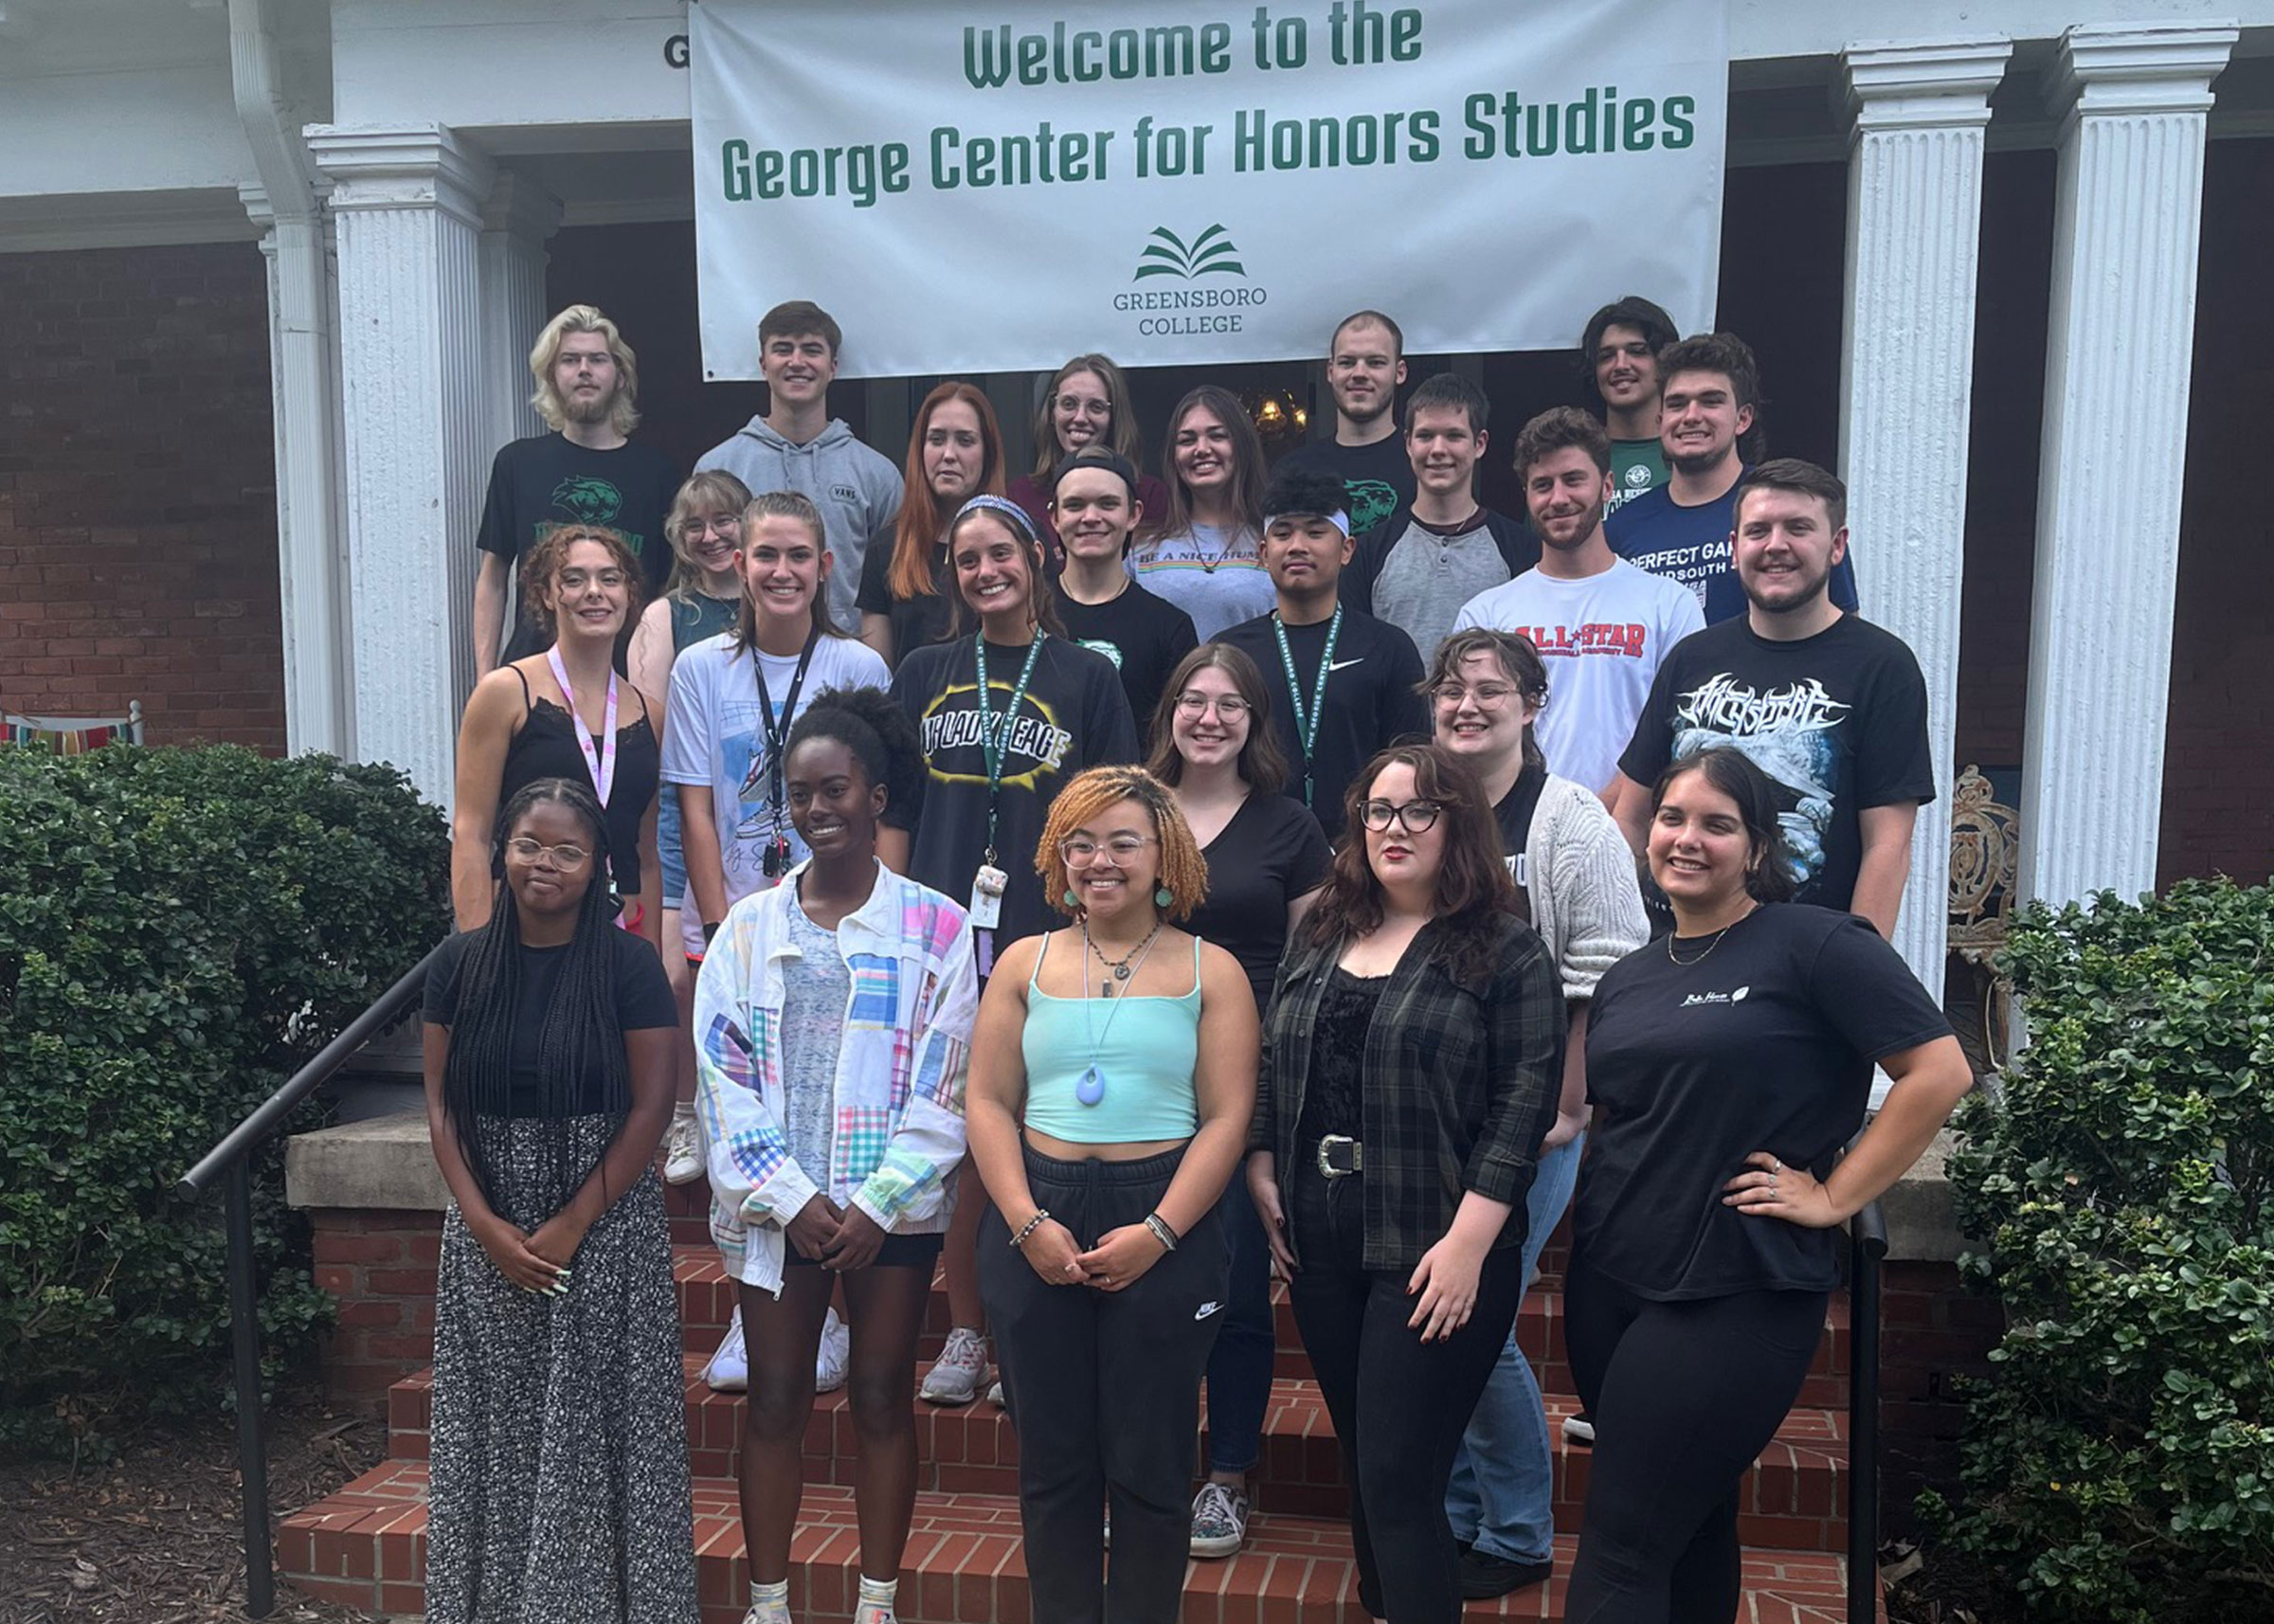 Greensboro College George Center for Honors Studies